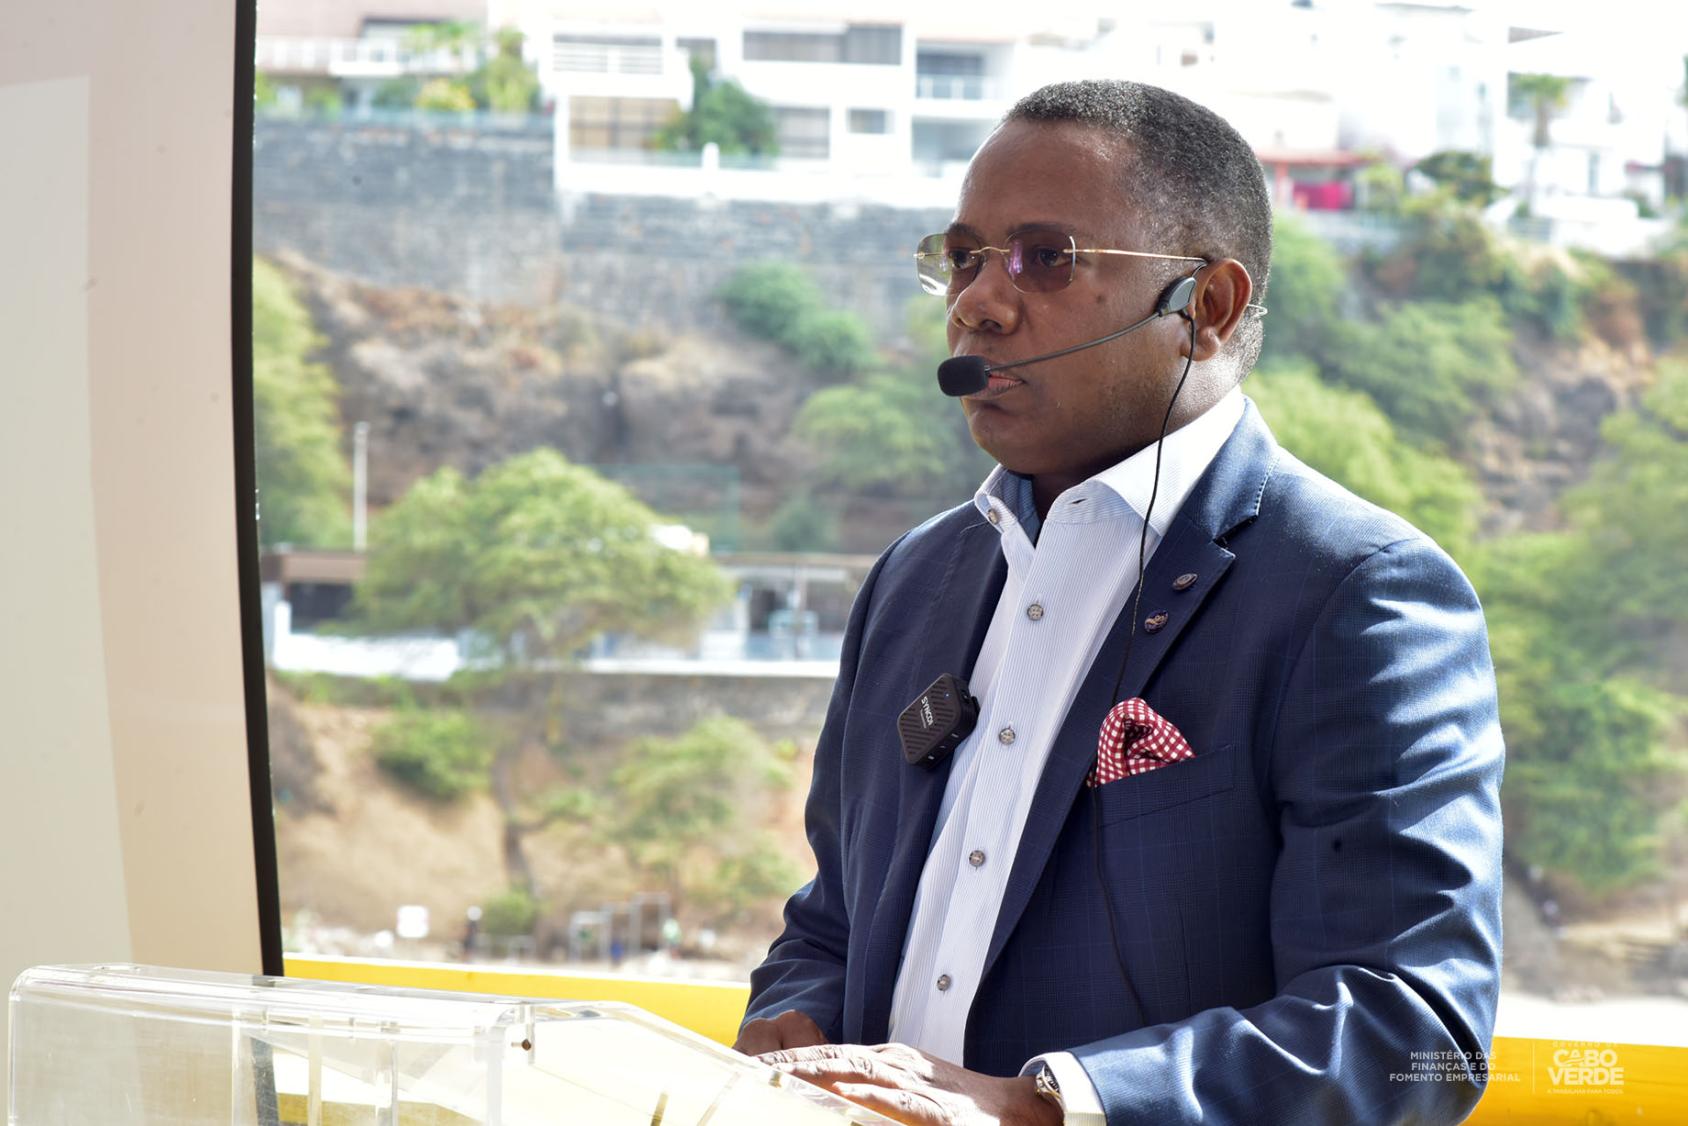 Deputy Prime Minister and Minister of Finance of Cabo Verde, Olavo Correia explains how importance strategic foresight is for Cabo Verde’s future development planning.